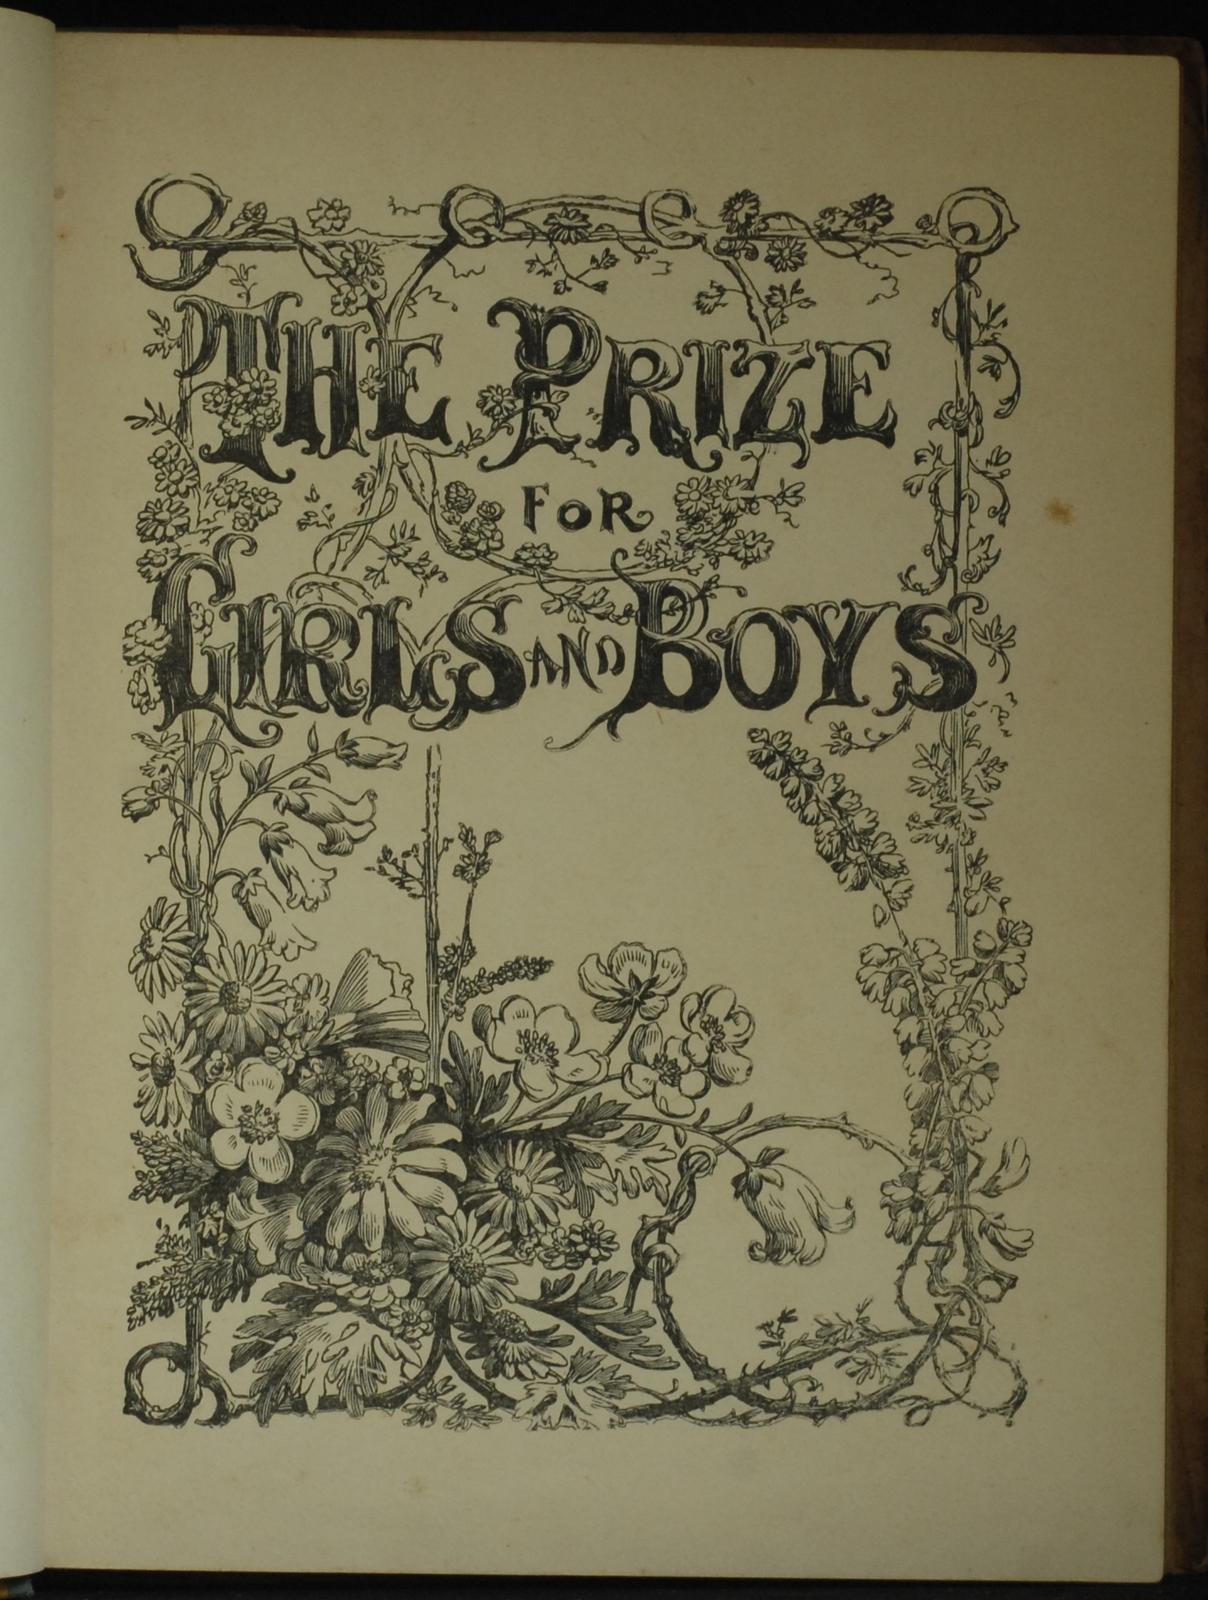 mbb006753d_-_unnamed_-_The_Prize_For_Girls_And_Boys_Vol_LXIV_-_Contains_Illustrations.jpg